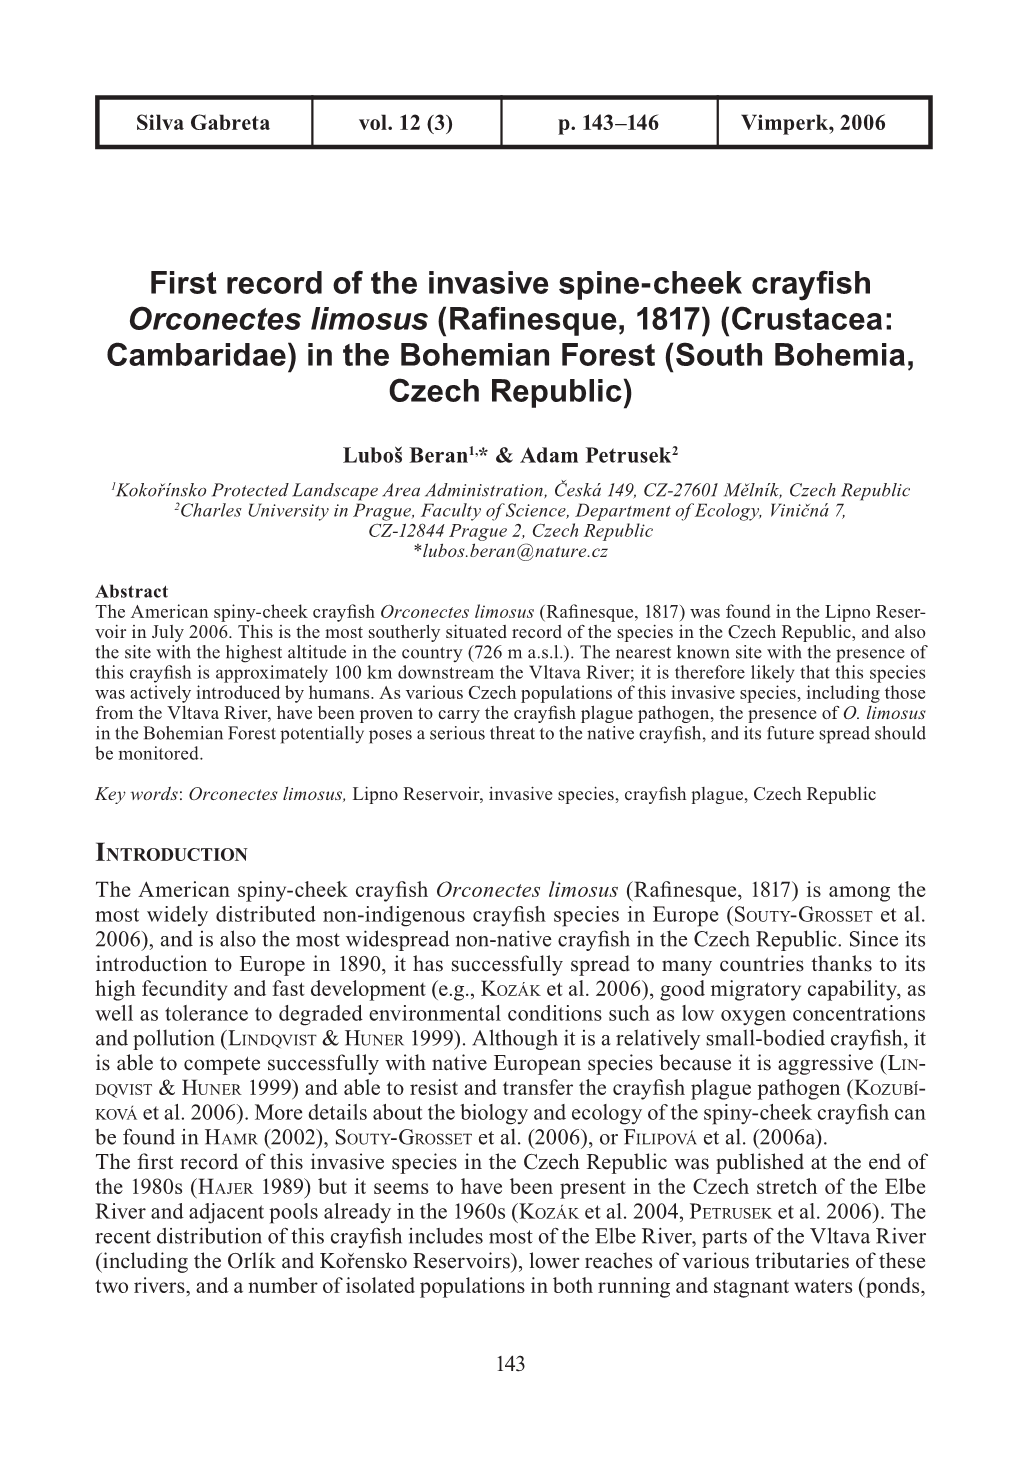 First Record of the Invasive Spine-Cheek Crayfish Orconectes